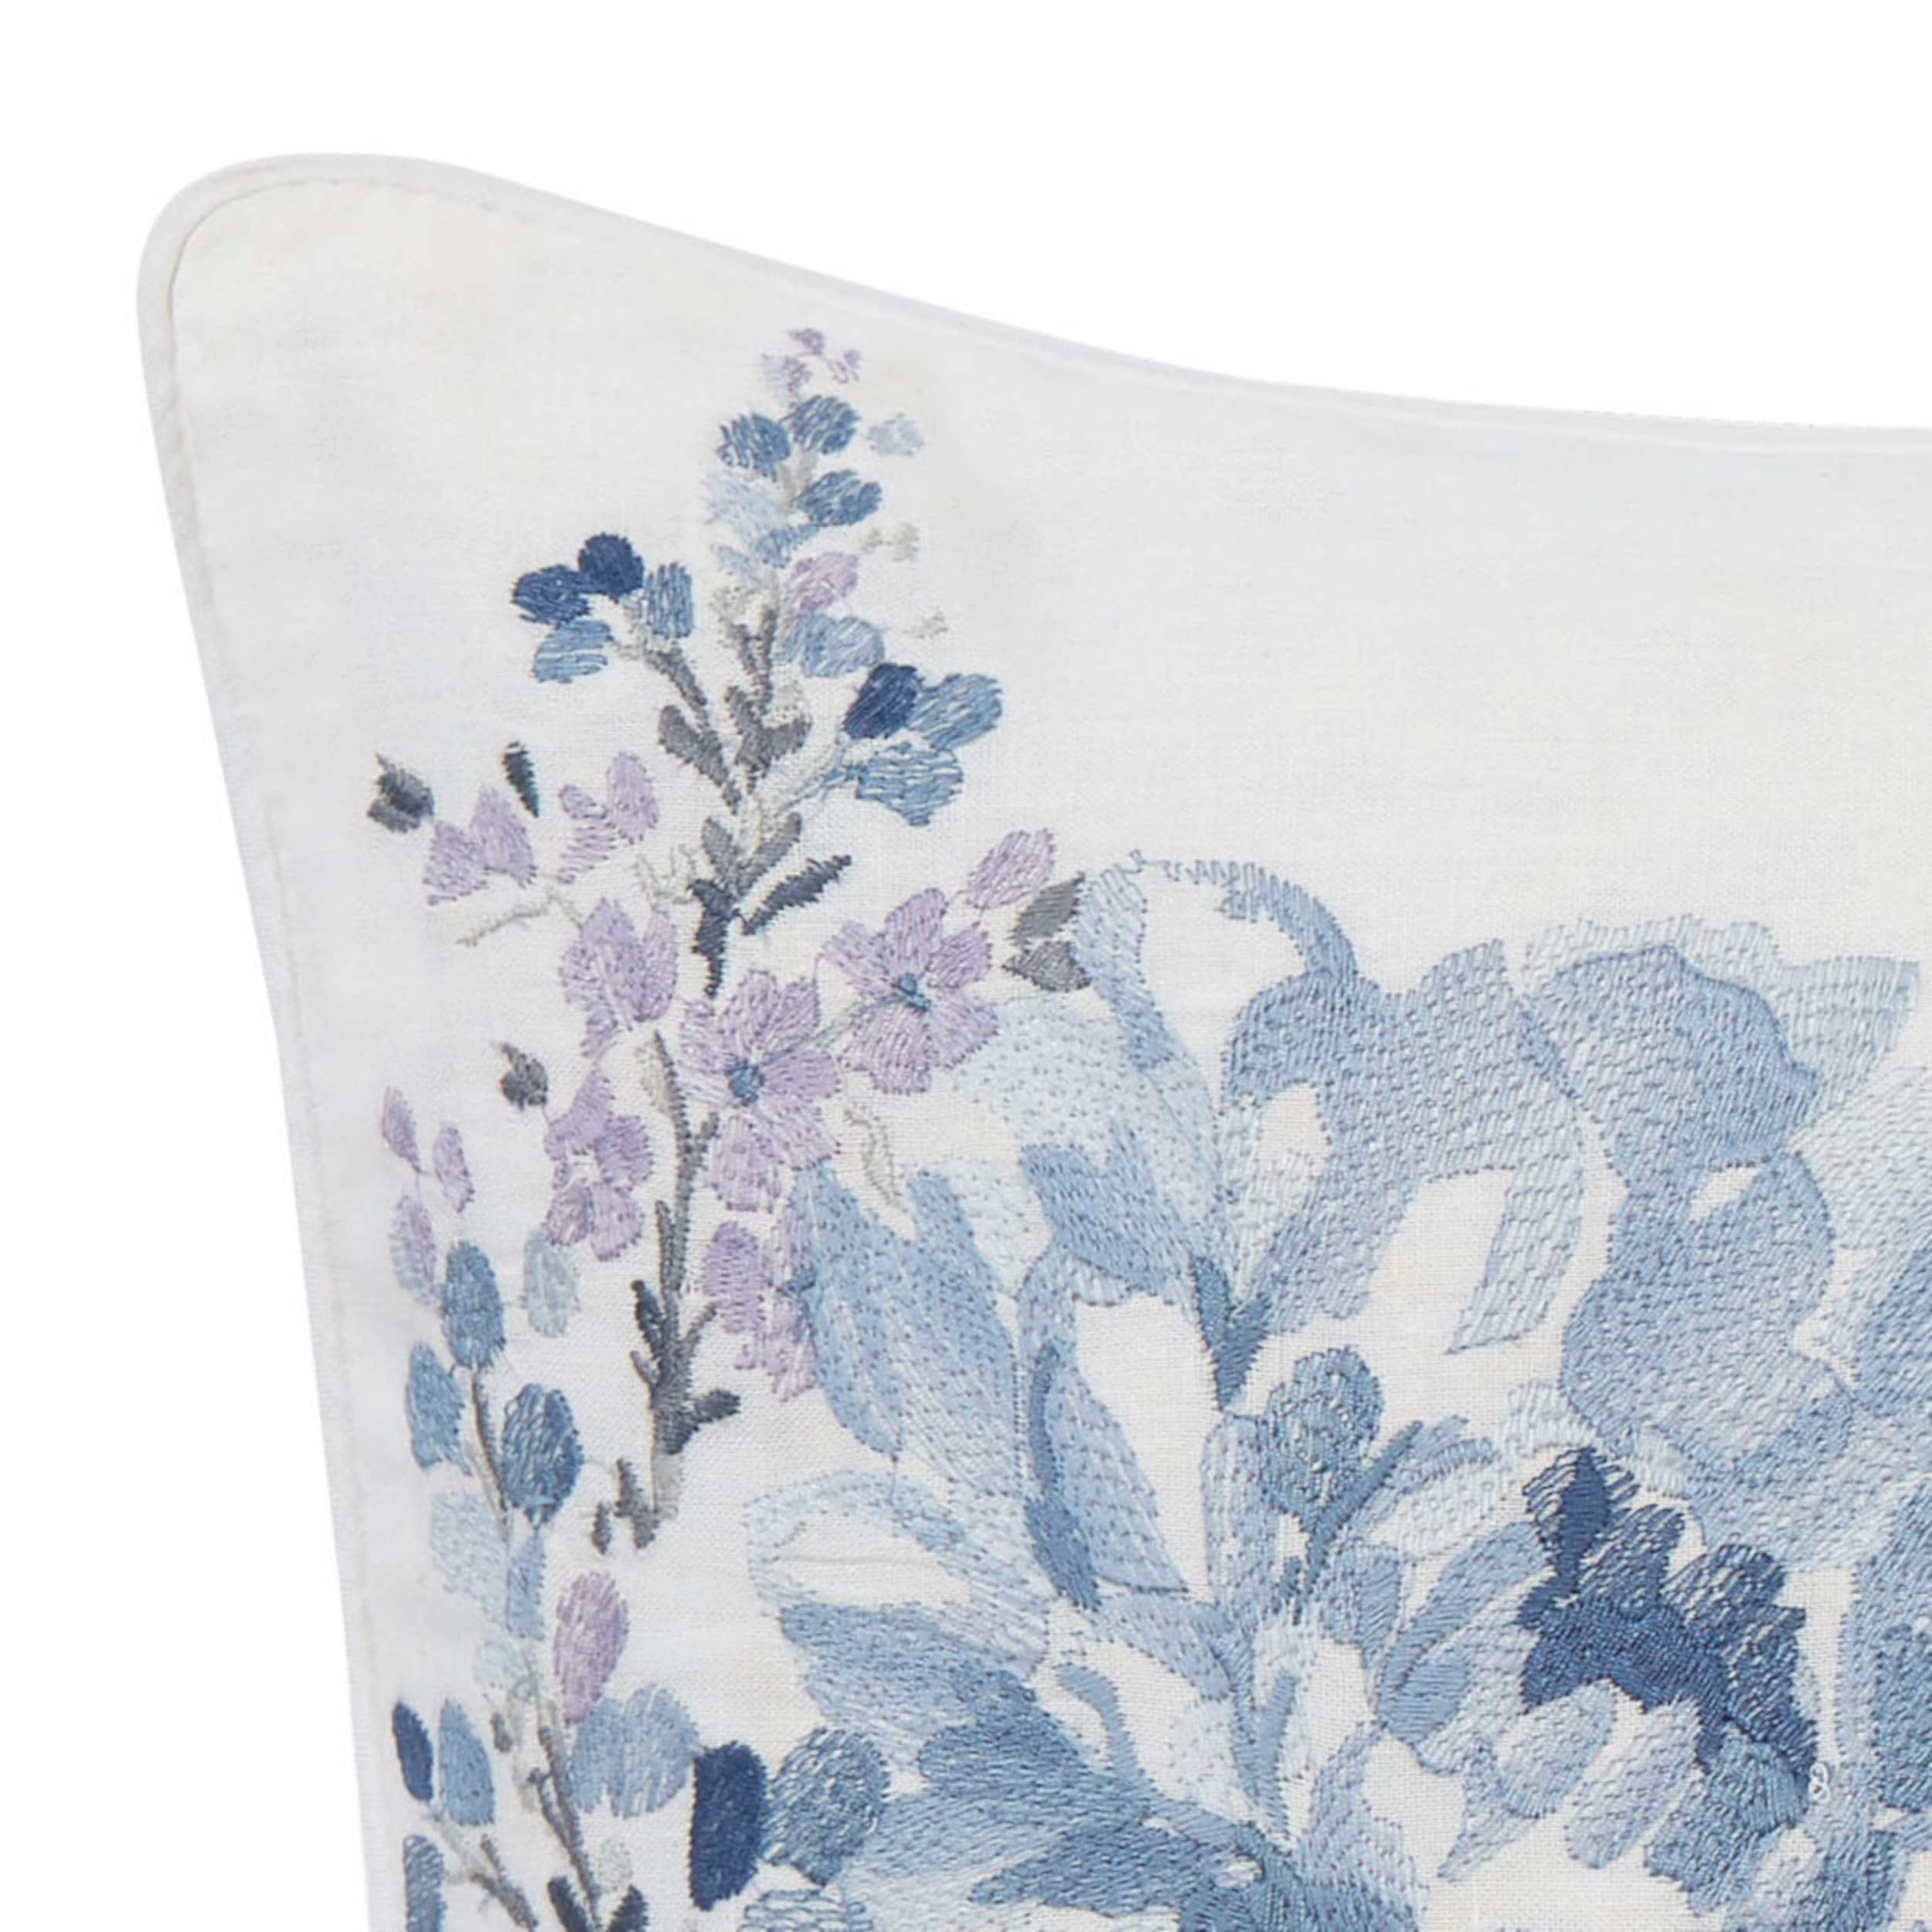 https://ak1.ostkcdn.com/images/products/is/images/direct/c064d12234b3502087af748896e54eb6bc9958eb/Laura-Ashley-Chloe-Floral-Embroidered-Throw-Pillow.jpg